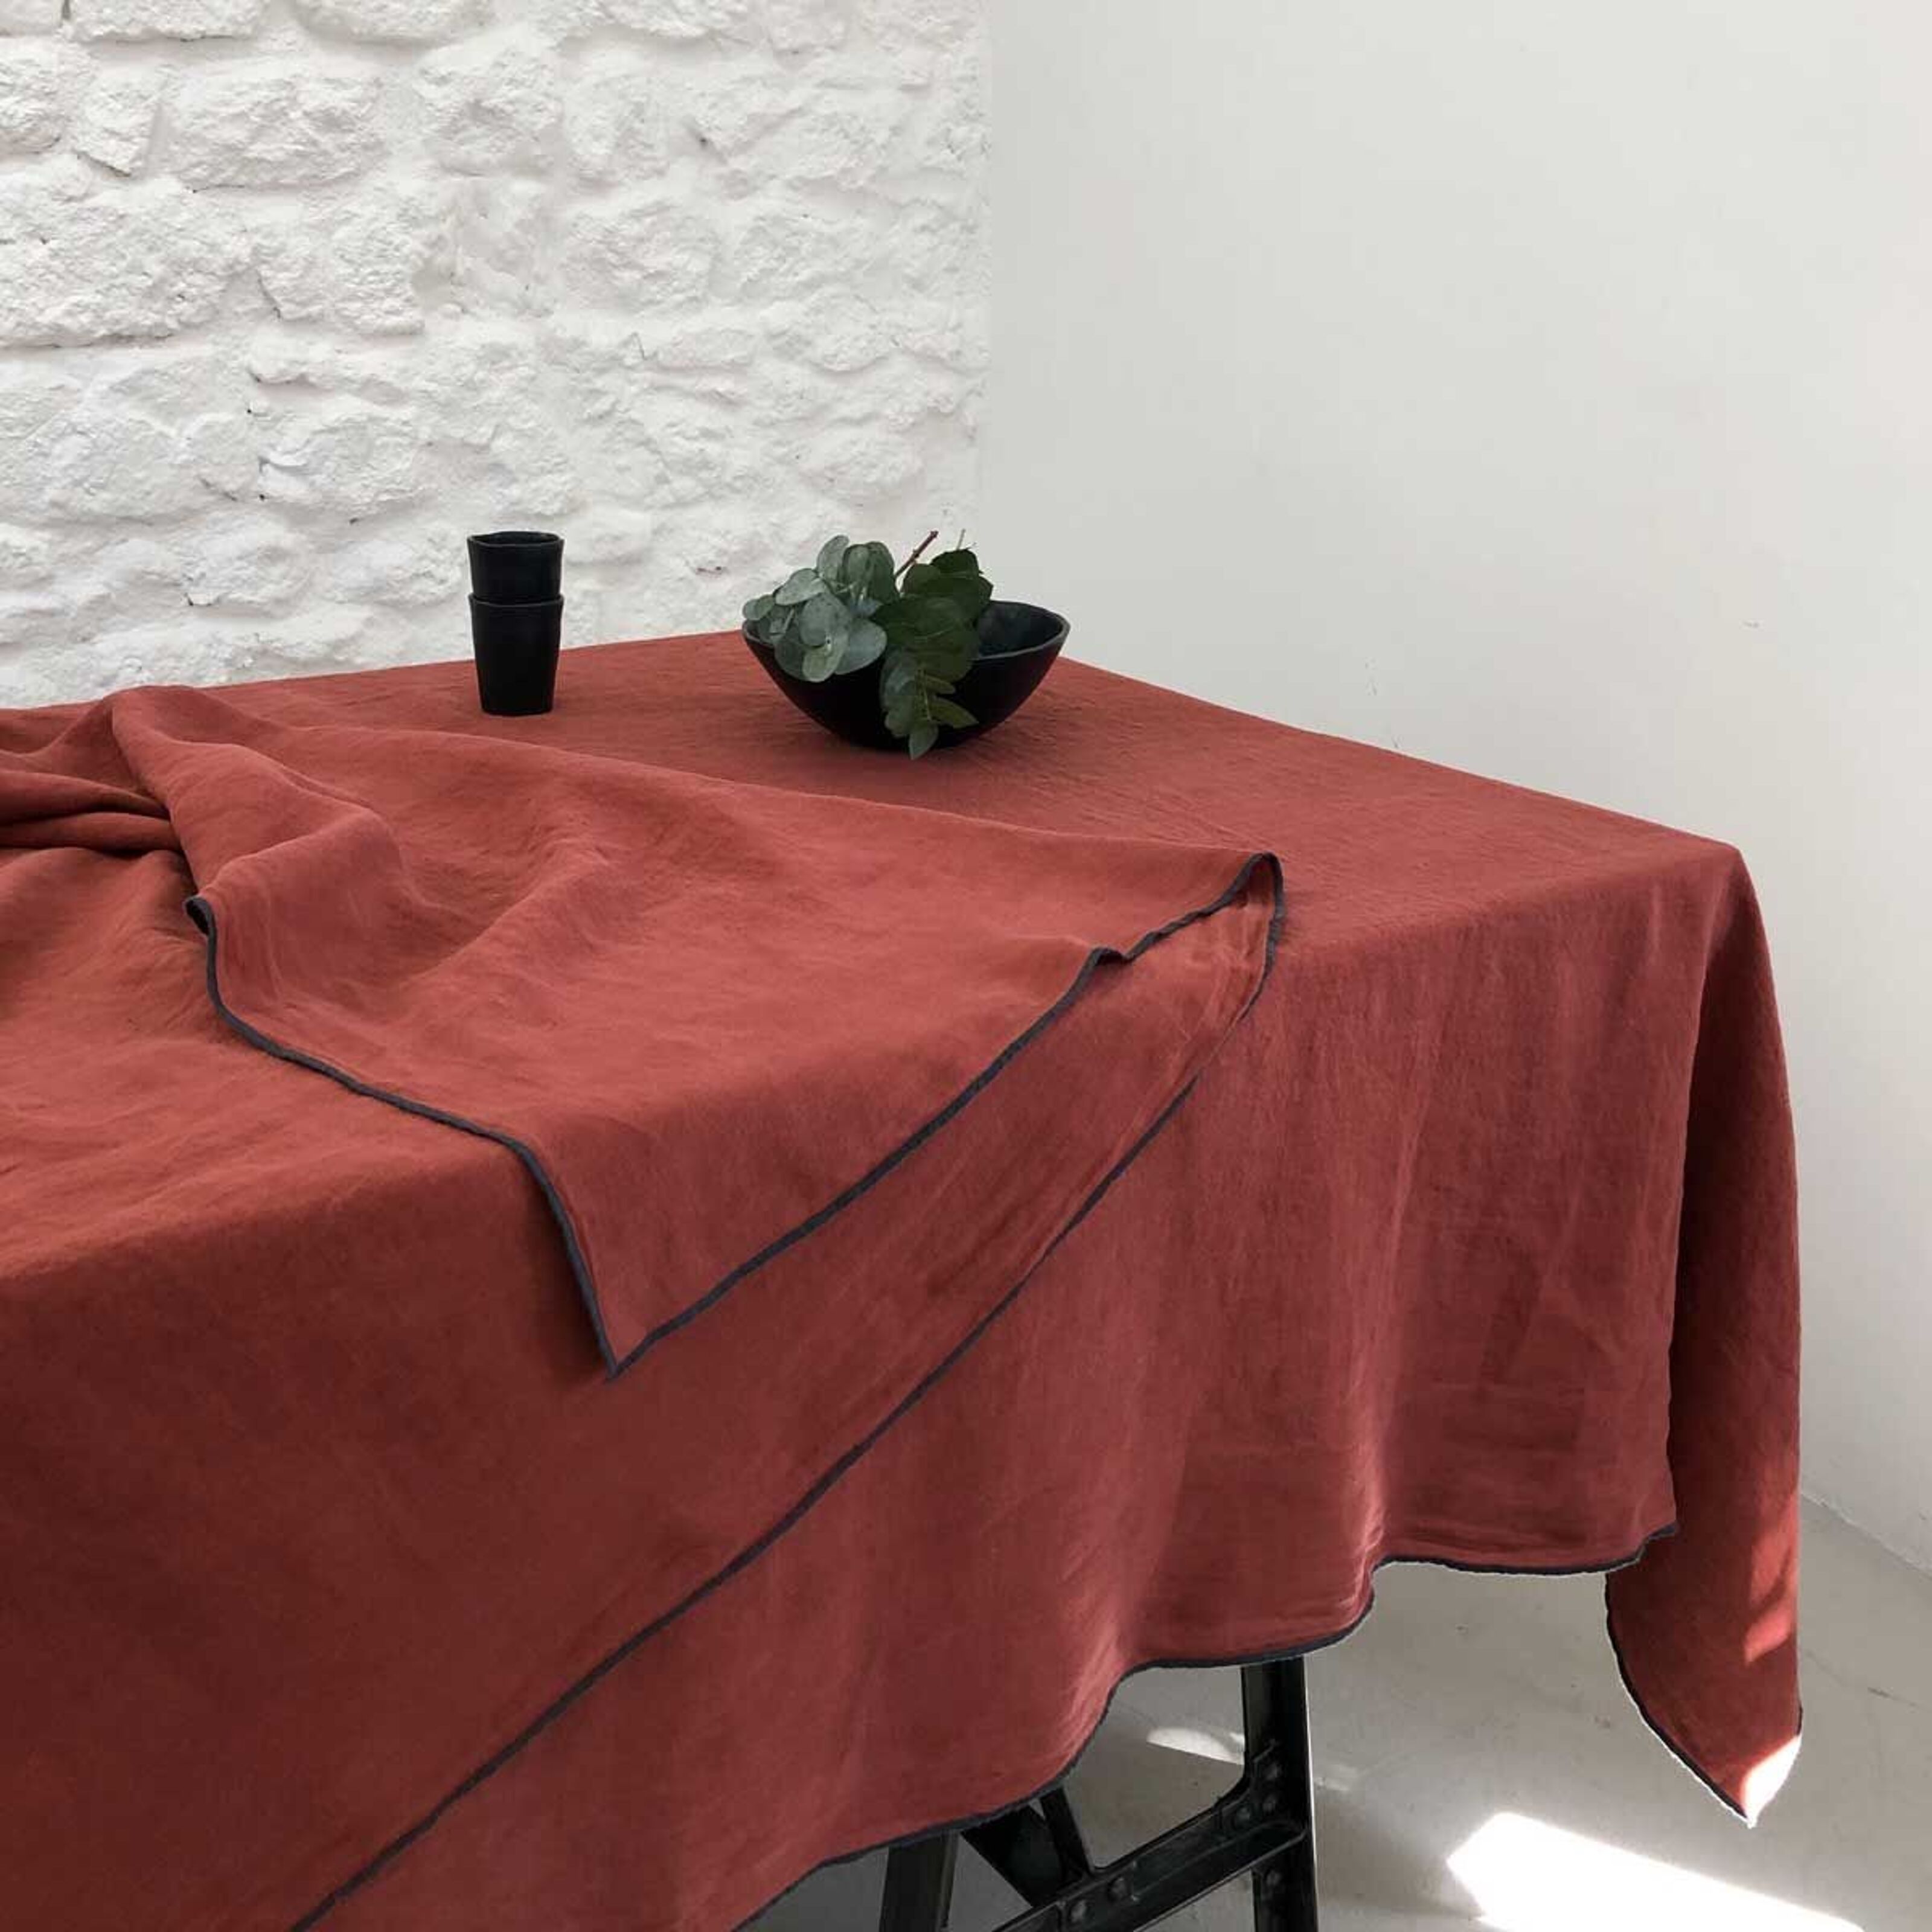 Buy wholesale Oslo Passage linen or 170x300cm Vernet curtain terracotta tablecloth washed - overlock